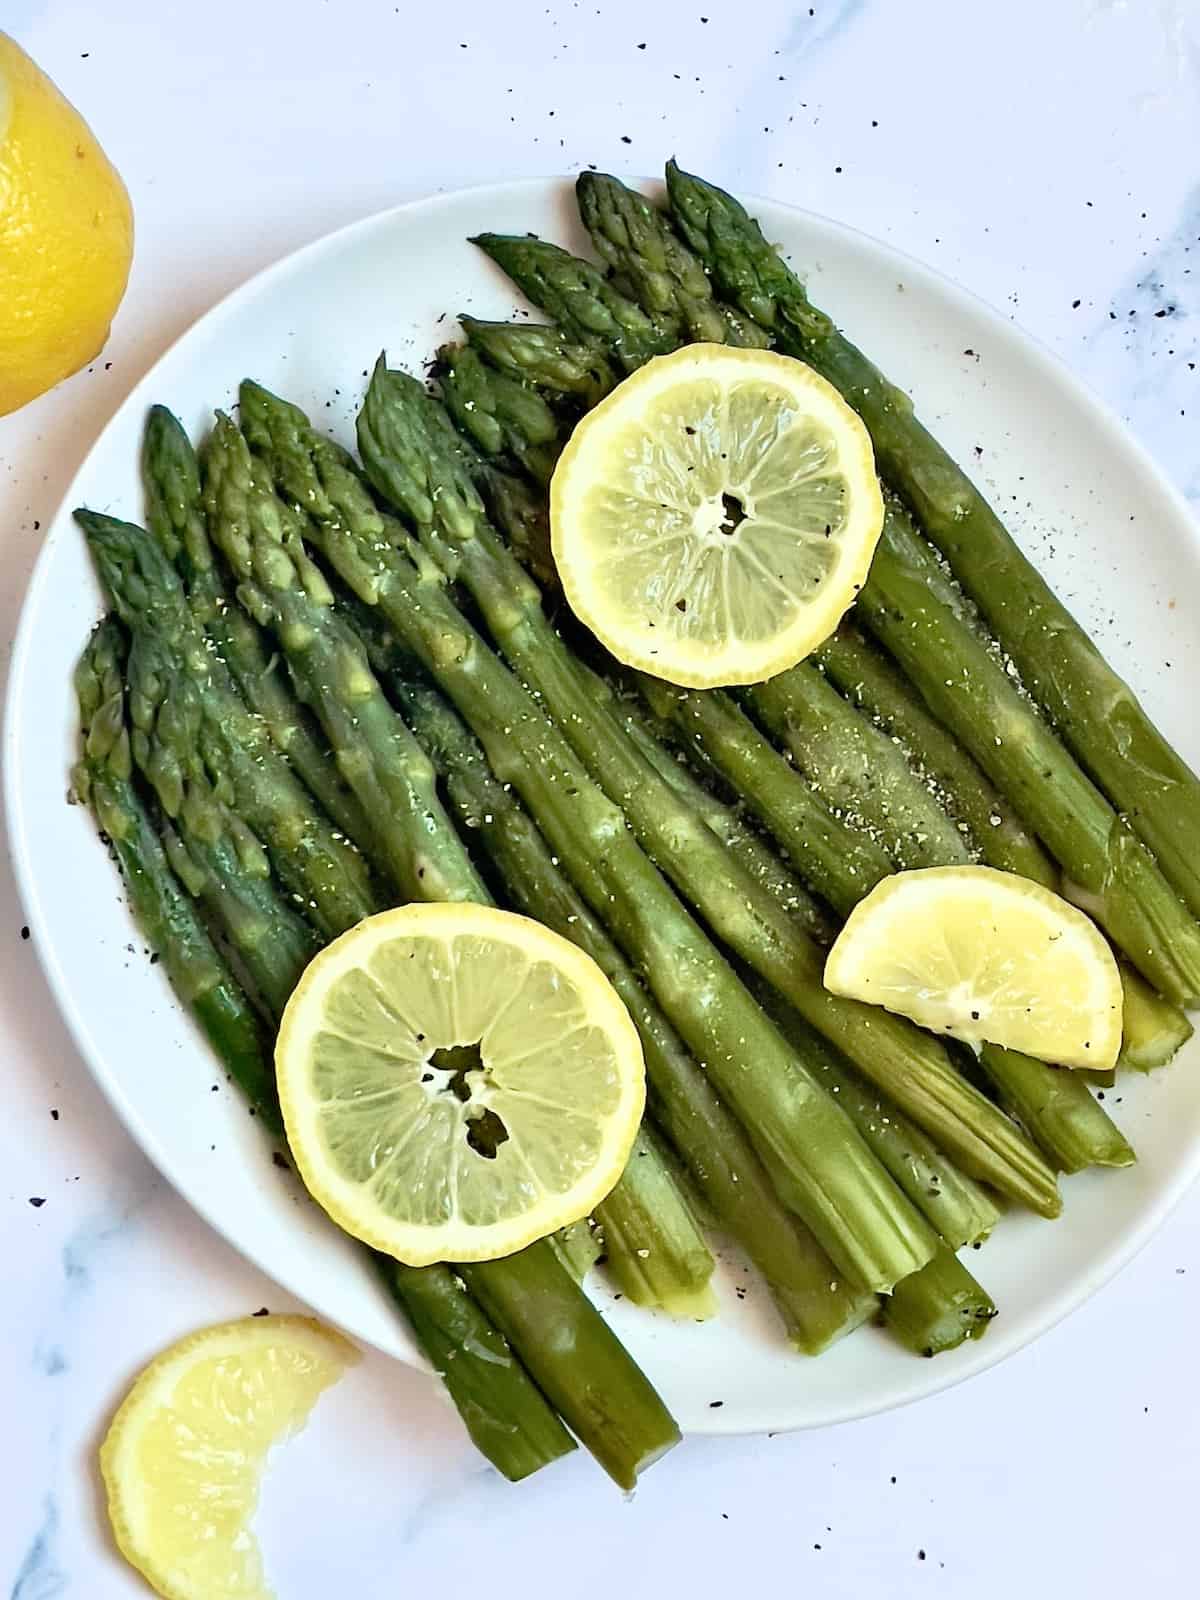 pressure cooked asparagus spears on a plate topped with lemon slices